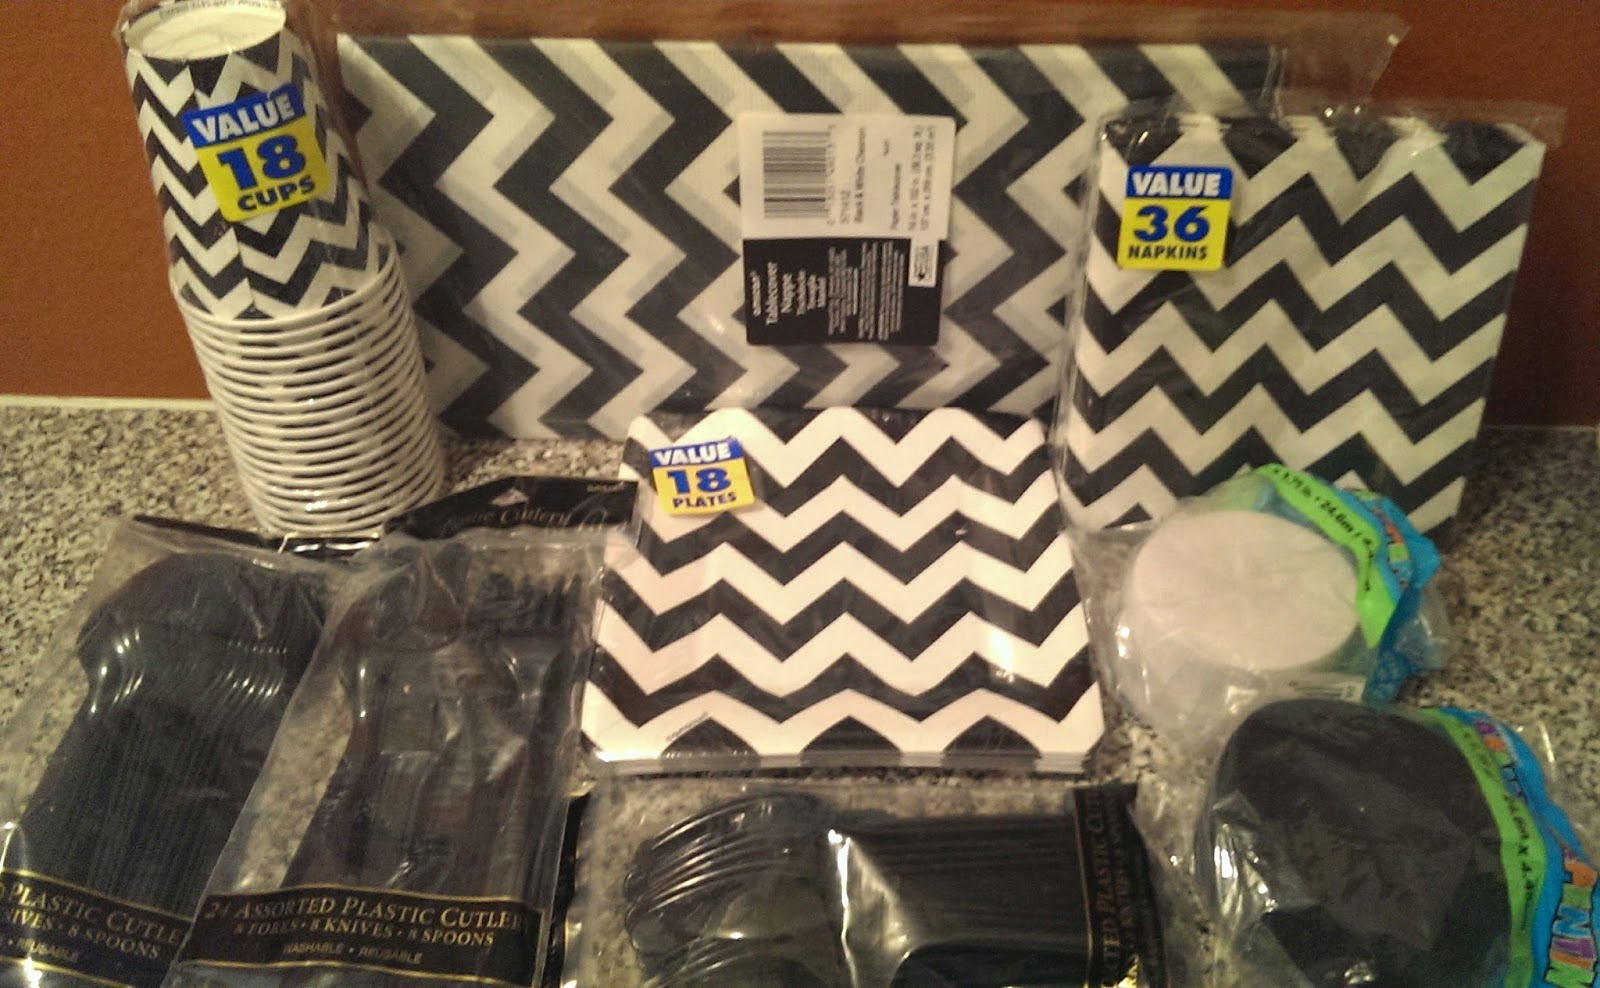 Party%2BSupplies Buy Party Goods Online - Black and White Chevron Big Party Pack